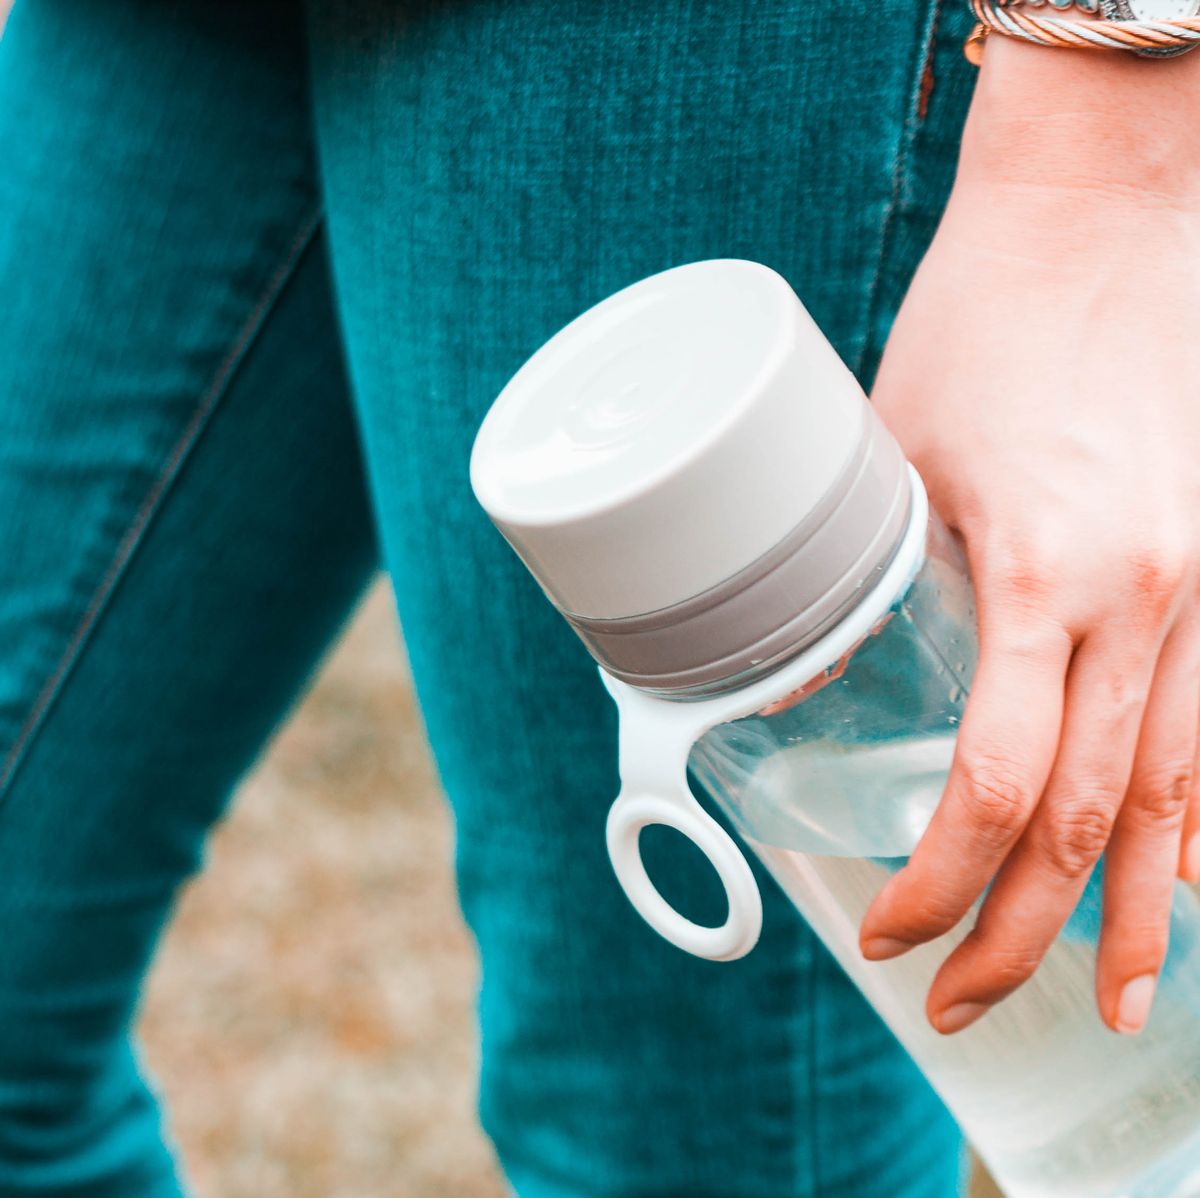 https://hips.hearstapps.com/hmg-prod/images/young-woman-is-holding-a-reusable-water-bottle-royalty-free-image-1703186804.jpg?crop=0.532xw:0.800xh;0.357xw,0.109xh&resize=1200:*